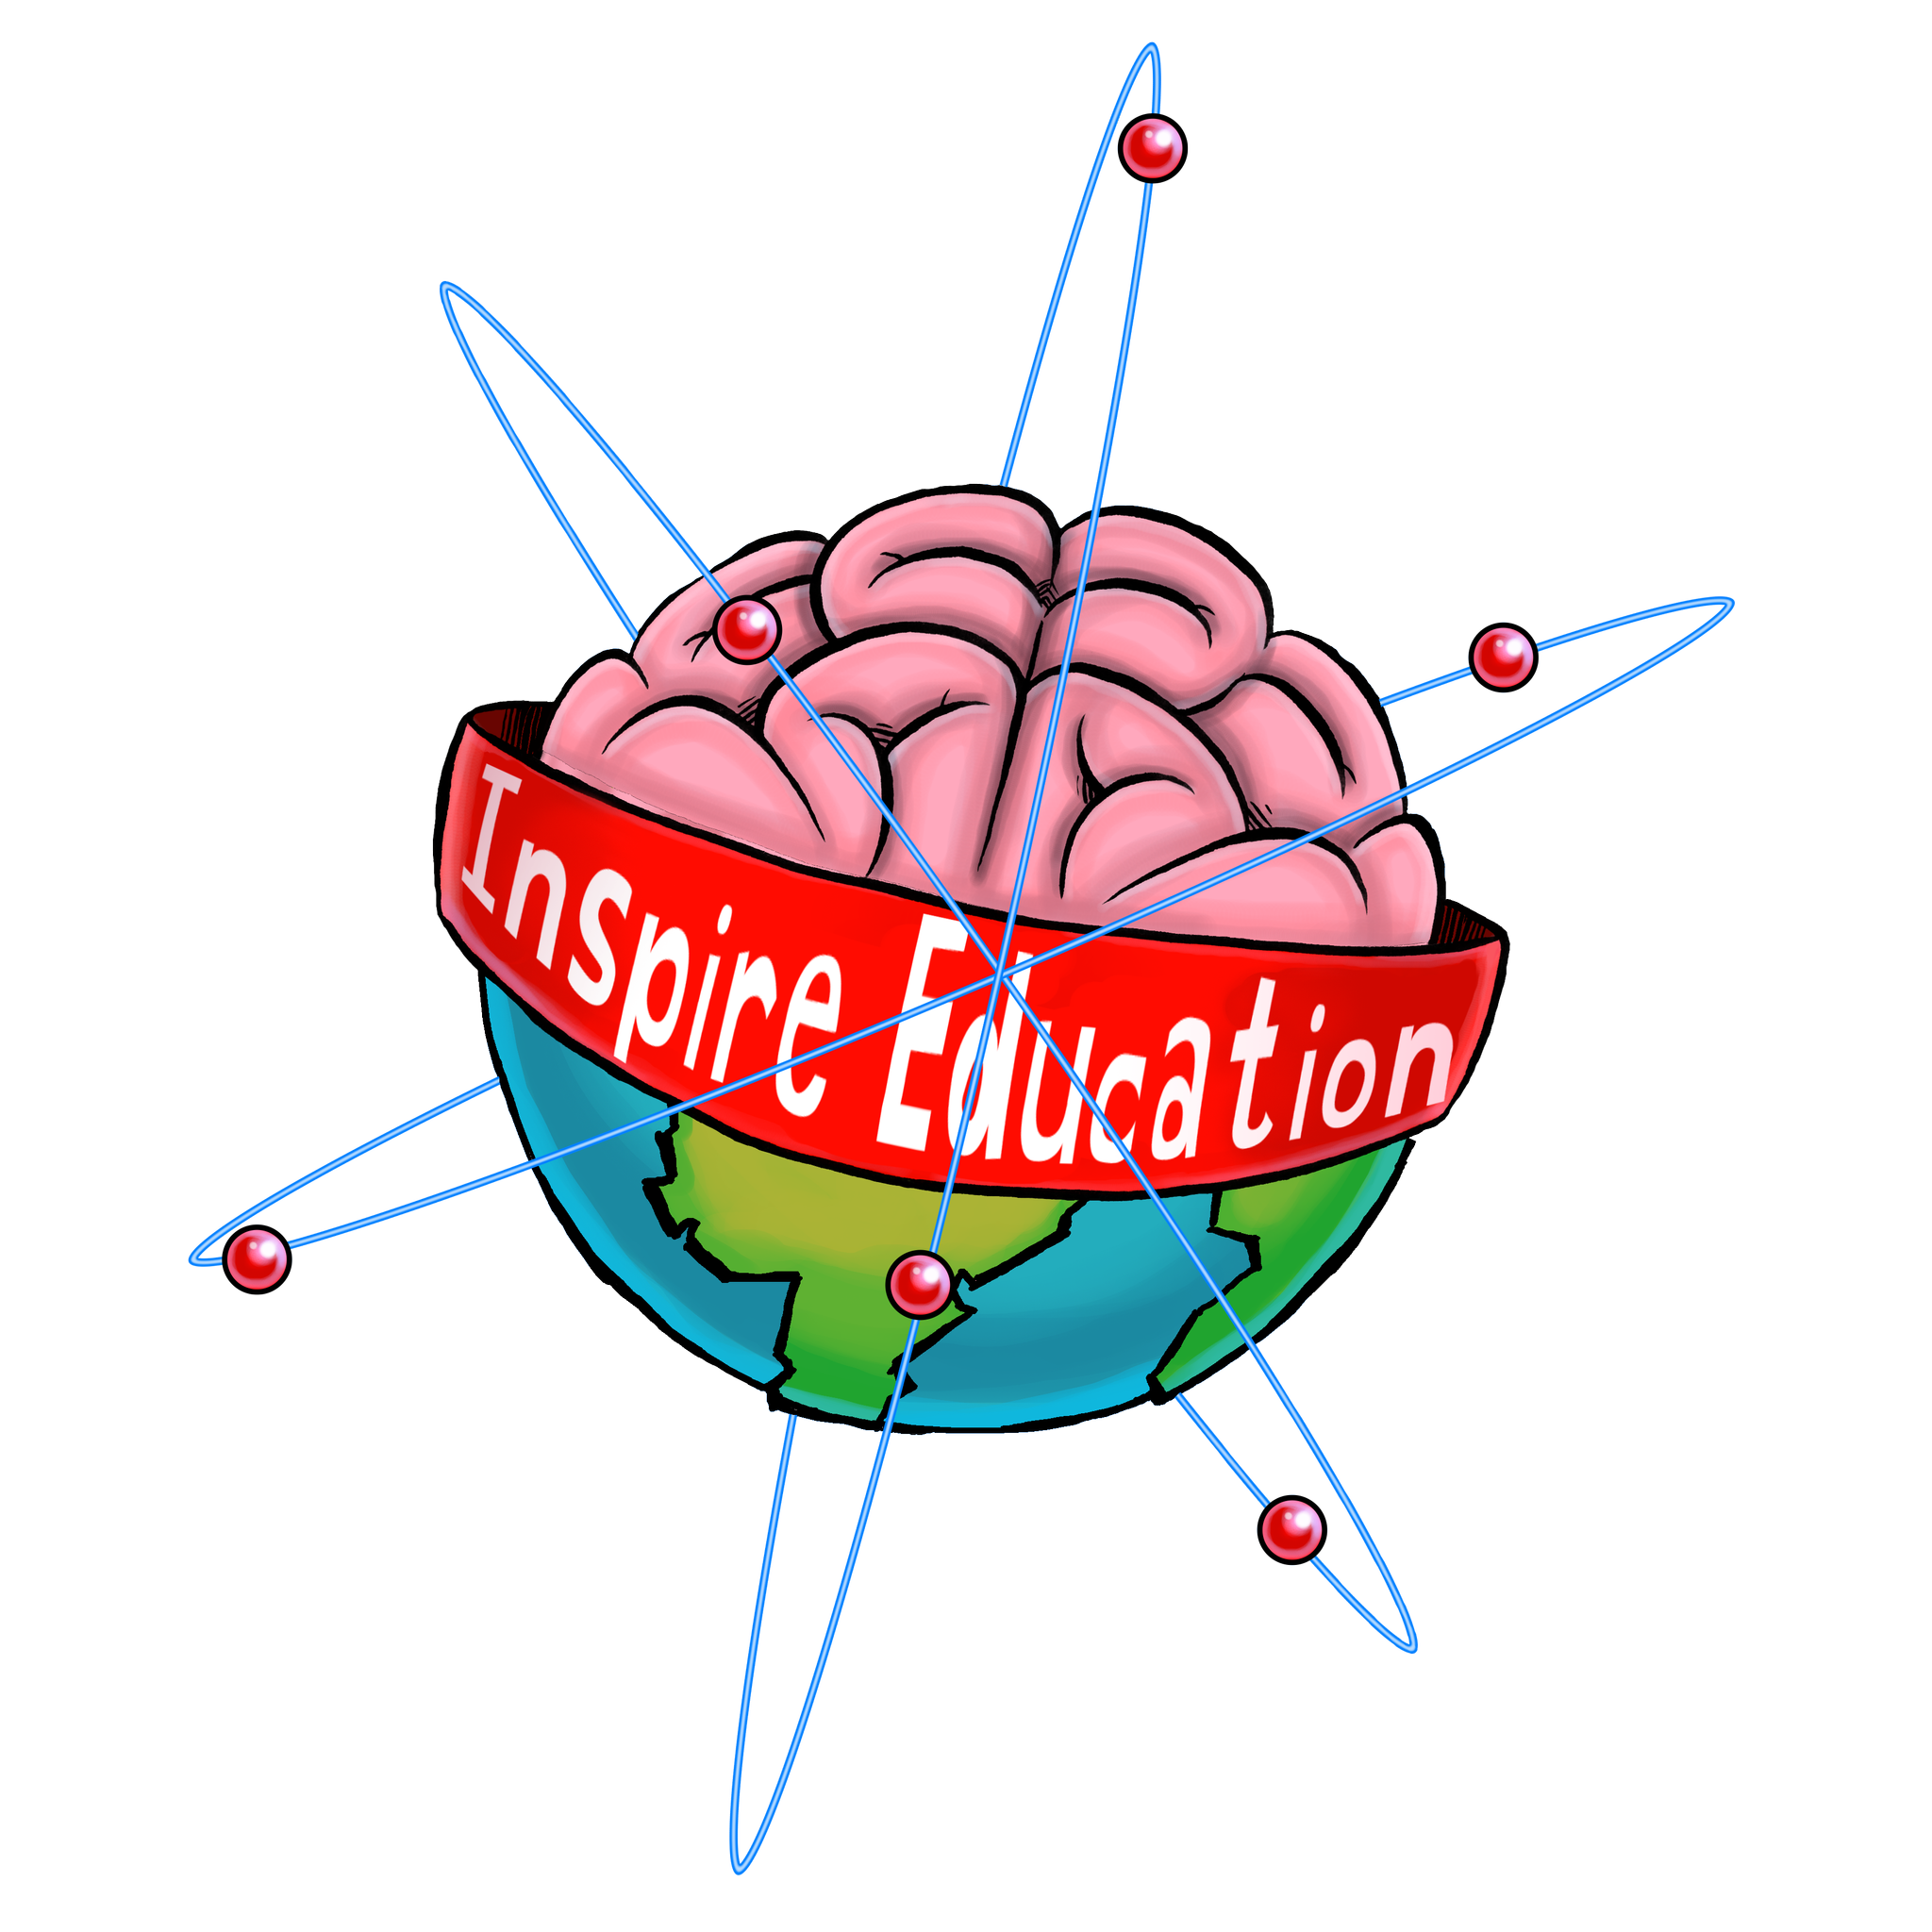 Inspire Education Logo.png